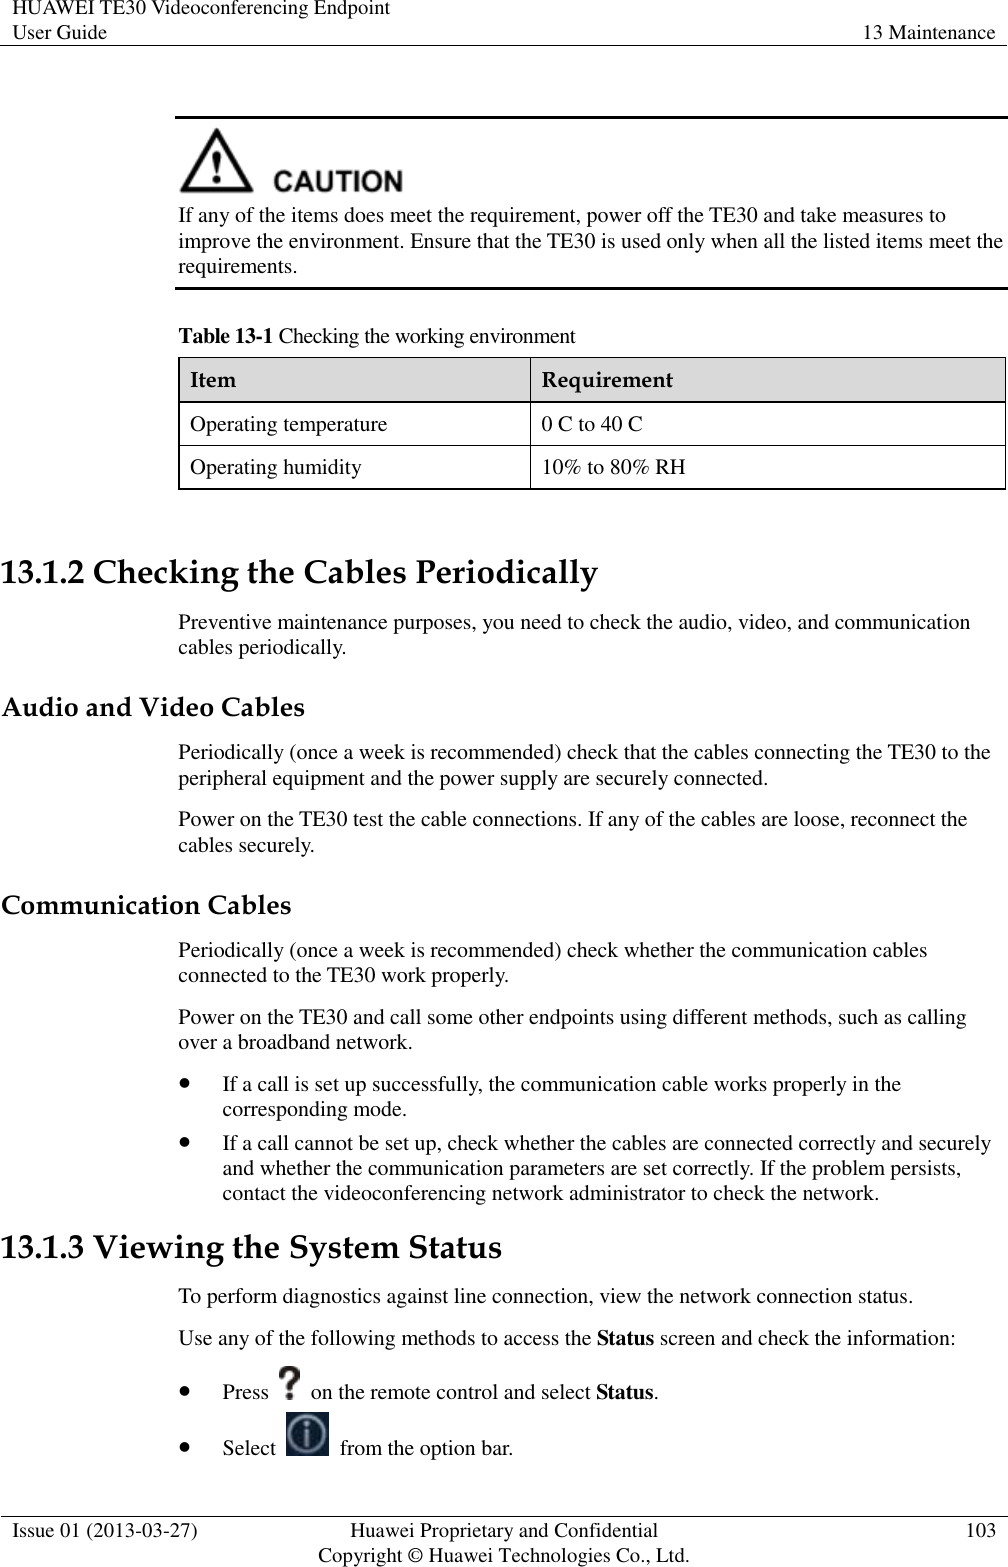 HUAWEI TE30 Videoconferencing Endpoint User Guide 13 Maintenance  Issue 01 (2013-03-27) Huawei Proprietary and Confidential                                     Copyright © Huawei Technologies Co., Ltd. 103    If any of the items does meet the requirement, power off the TE30 and take measures to improve the environment. Ensure that the TE30 is used only when all the listed items meet the requirements. Table 13-1 Checking the working environment Item Requirement Operating temperature 0 C to 40 C Operating humidity 10% to 80% RH  13.1.2 Checking the Cables Periodically Preventive maintenance purposes, you need to check the audio, video, and communication cables periodically. Audio and Video Cables Periodically (once a week is recommended) check that the cables connecting the TE30 to the peripheral equipment and the power supply are securely connected. Power on the TE30 test the cable connections. If any of the cables are loose, reconnect the cables securely. Communication Cables Periodically (once a week is recommended) check whether the communication cables connected to the TE30 work properly.   Power on the TE30 and call some other endpoints using different methods, such as calling over a broadband network.  If a call is set up successfully, the communication cable works properly in the corresponding mode.  If a call cannot be set up, check whether the cables are connected correctly and securely and whether the communication parameters are set correctly. If the problem persists, contact the videoconferencing network administrator to check the network. 13.1.3 Viewing the System Status To perform diagnostics against line connection, view the network connection status. Use any of the following methods to access the Status screen and check the information:  Press    on the remote control and select Status.  Select    from the option bar. 